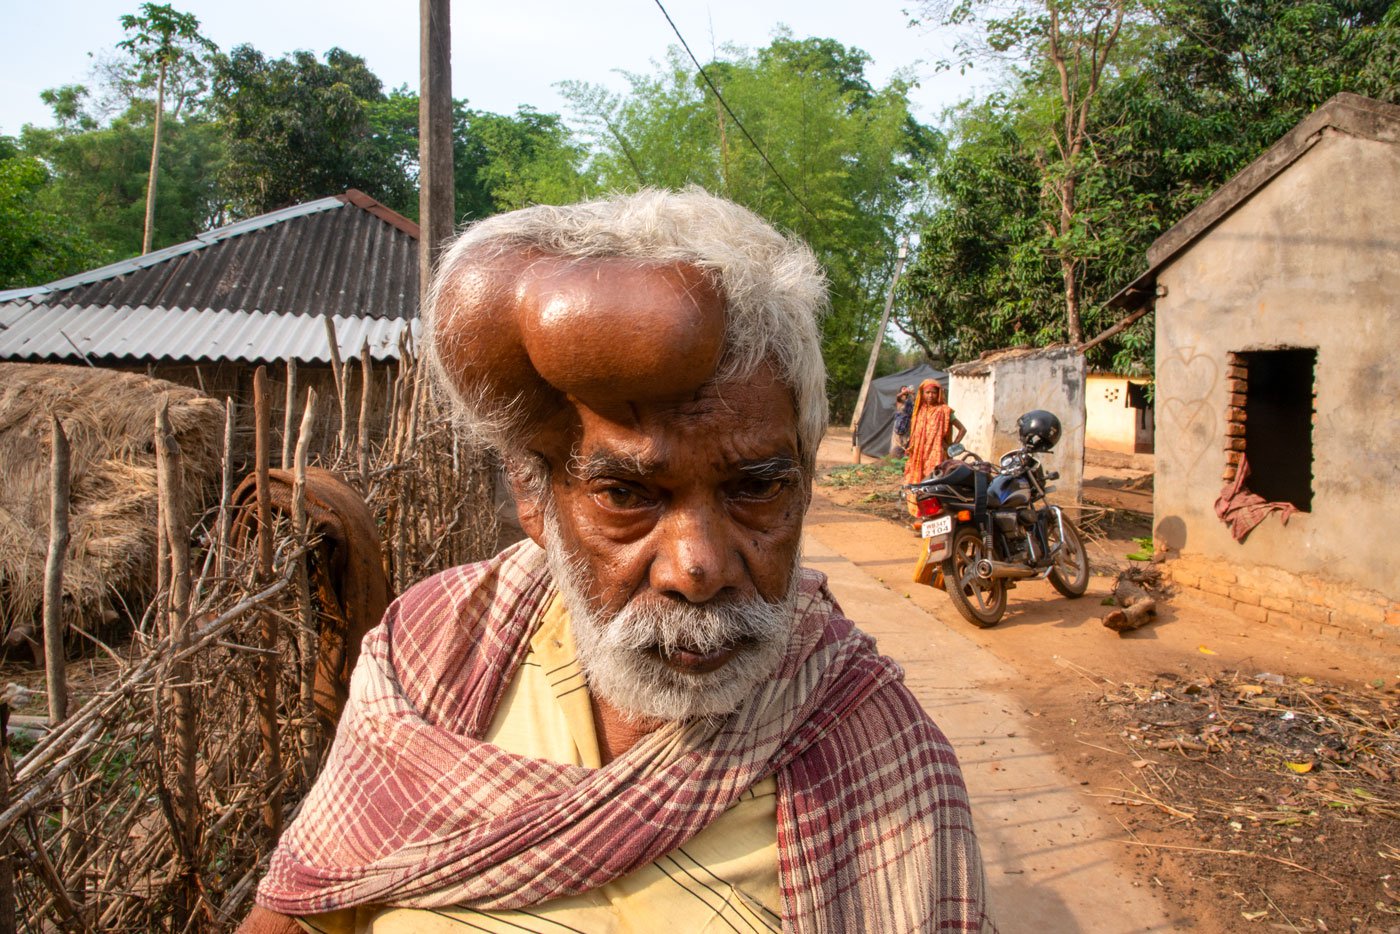 Konda Bhakta from Tapoban shows his tumour. 'First it was a small tumour. I ignored it. Then it became big. I wanted to go to the hospital but could not as they are located very far in Jhargram town. I do not have that much money, so I never had a proper treatment'